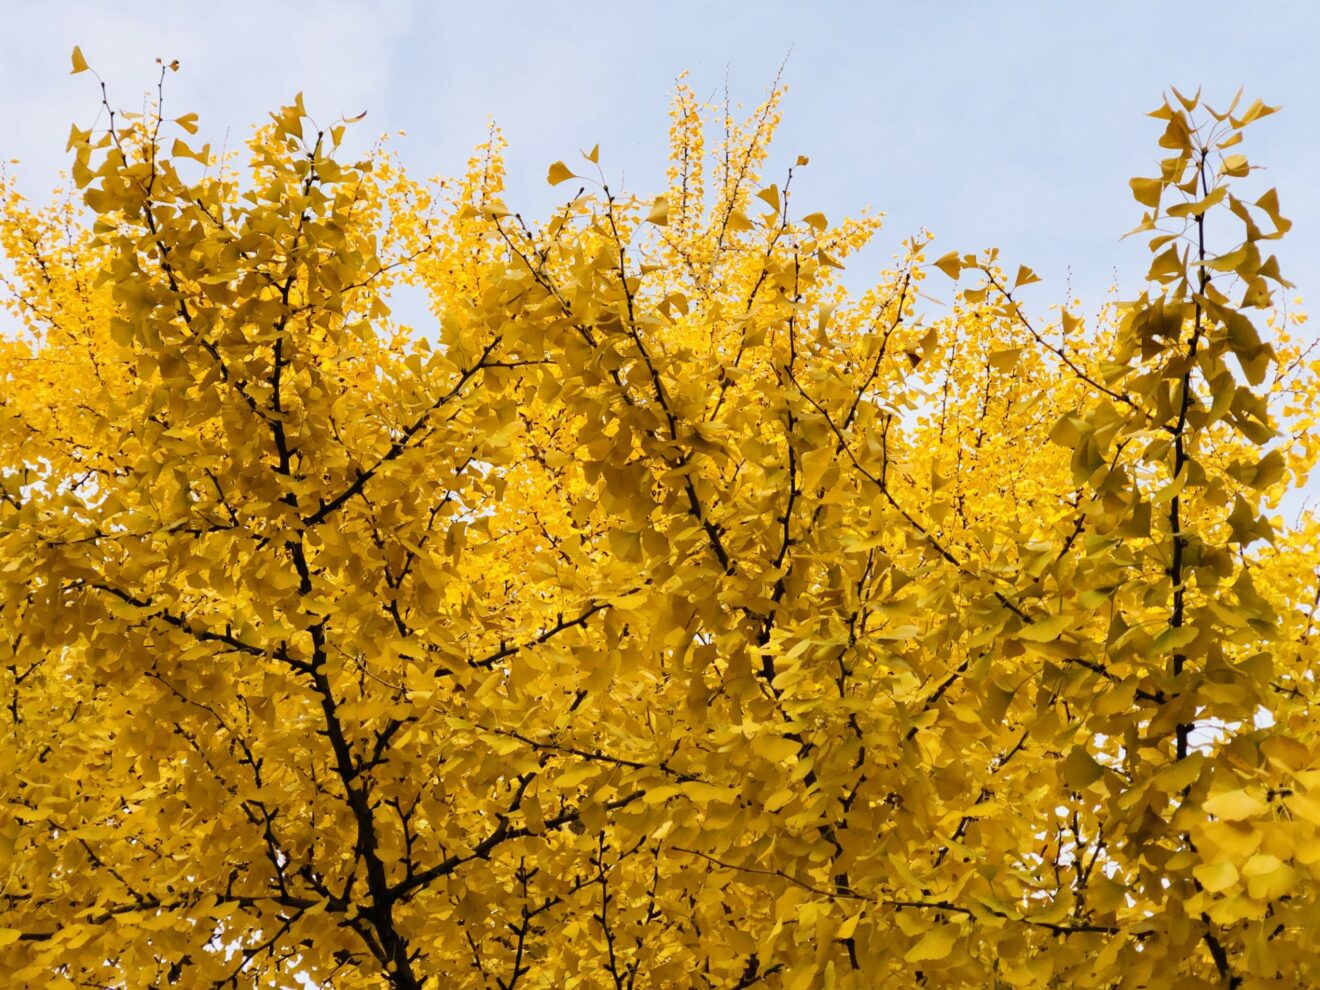 Picture of yellow gingko biloba leaves in autumn season Don't tell my sisters